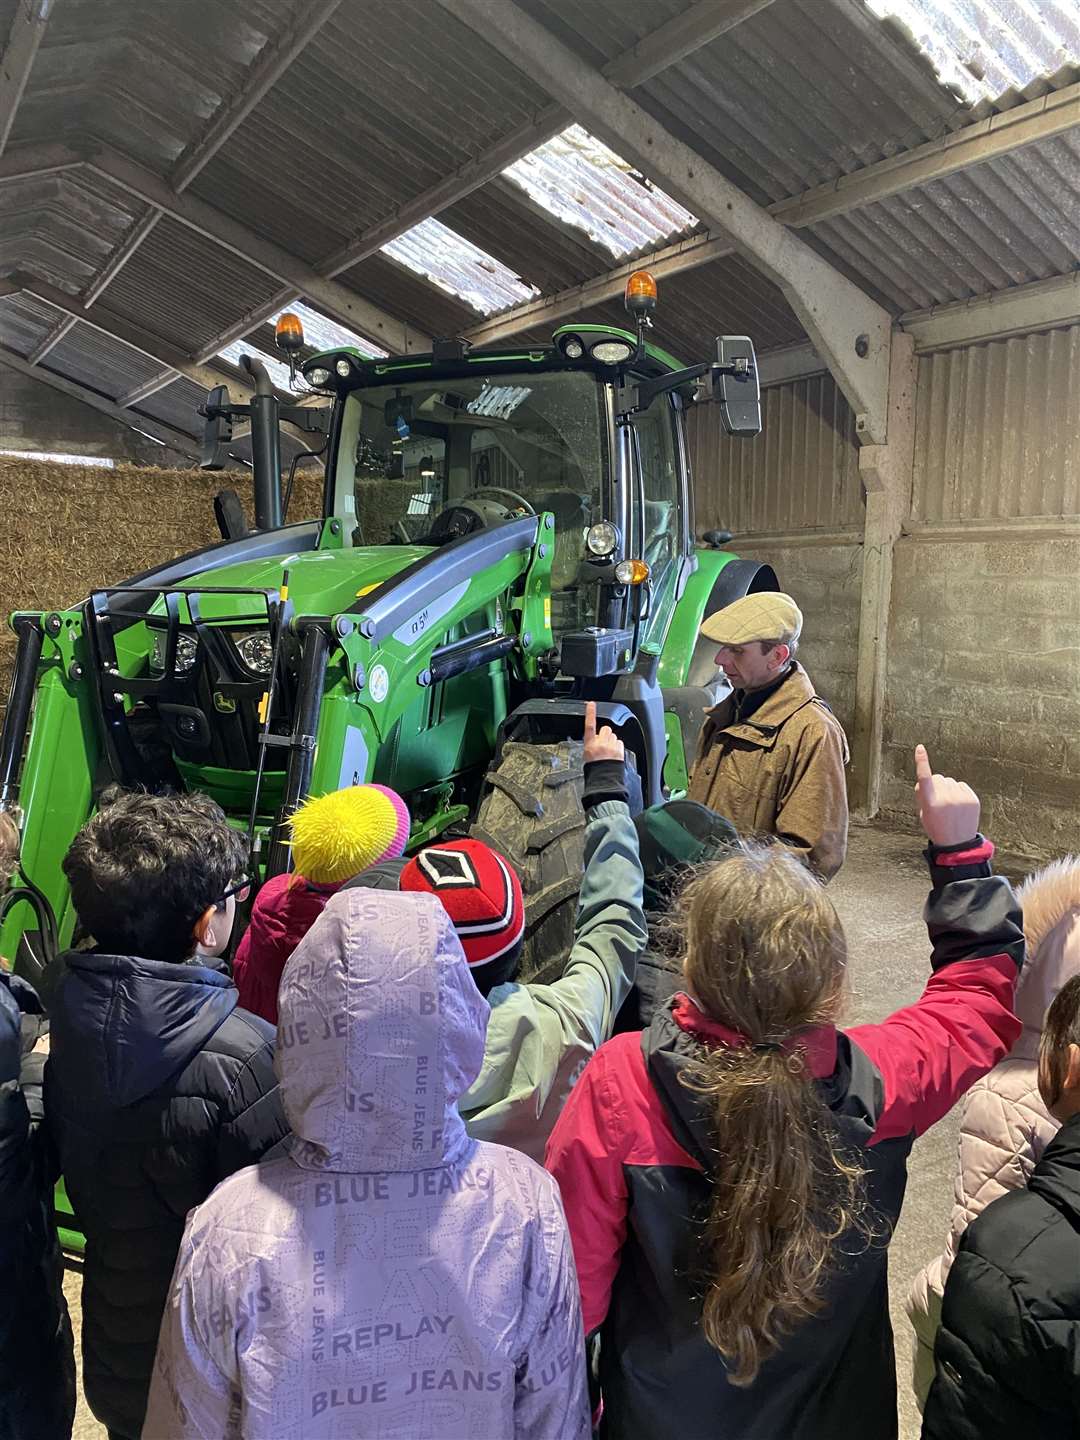 The kids were fascinated in the farm machinery